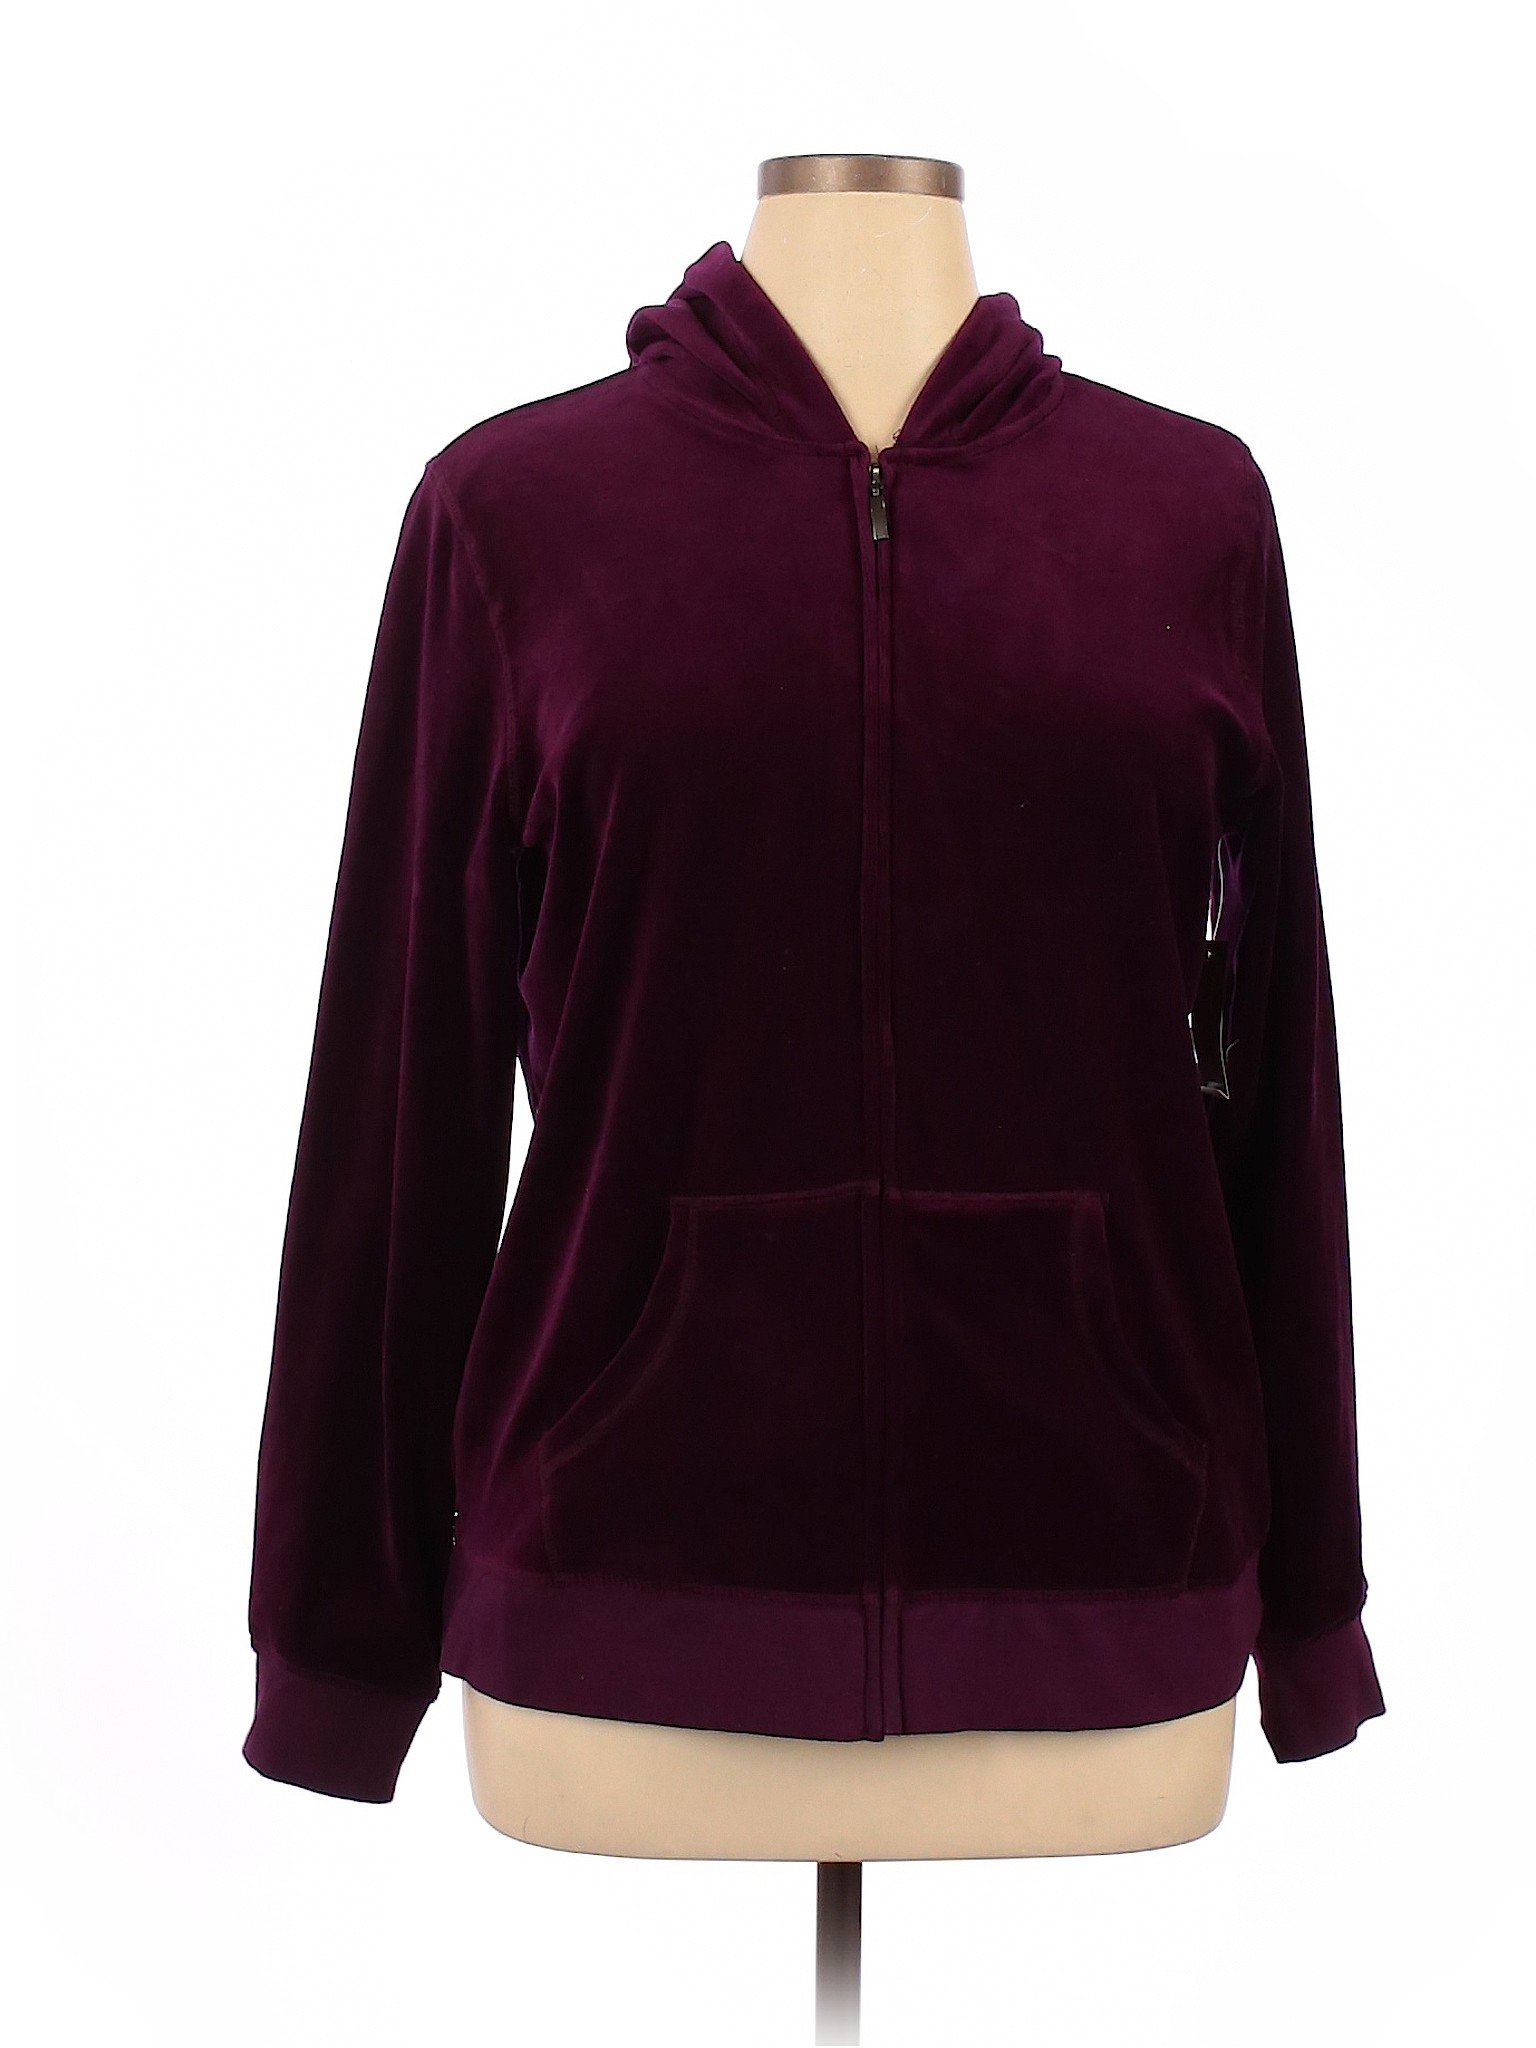 Made for Life Solid Purple Zip Up Hoodie Size XL - 54% off | thredUP